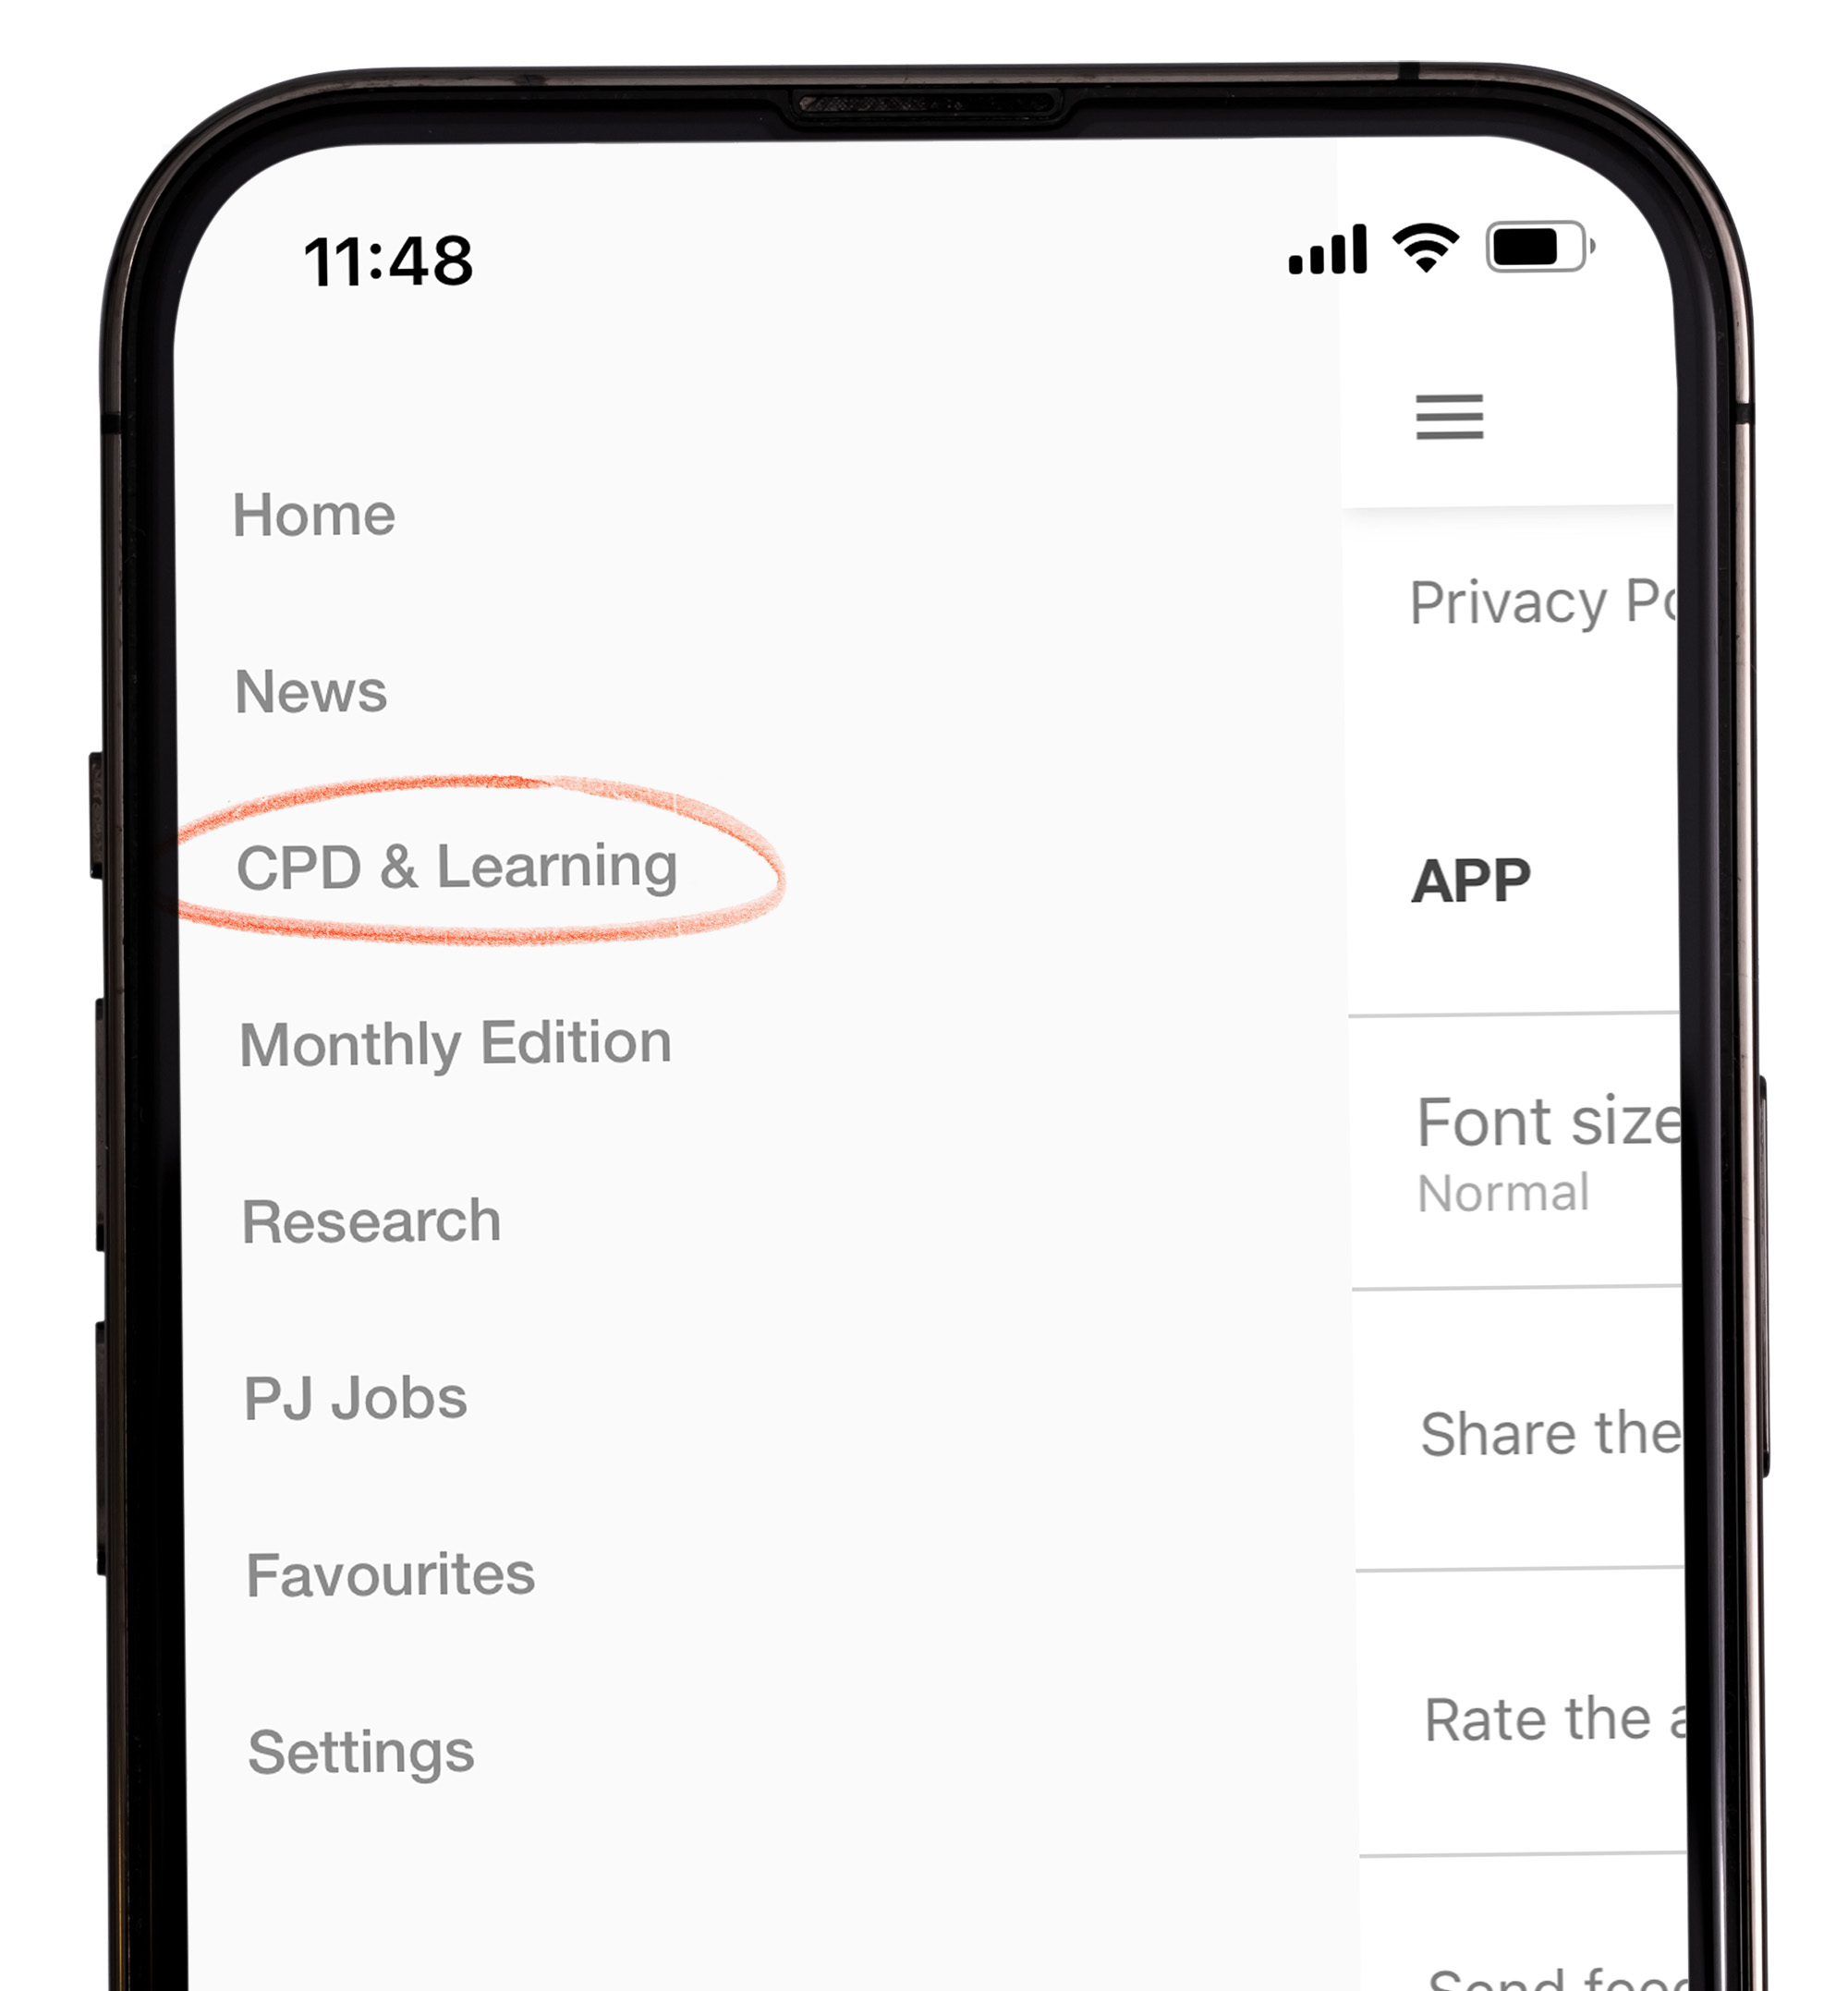 Image of an iphone showing the PJ Jobs section in the PJ app